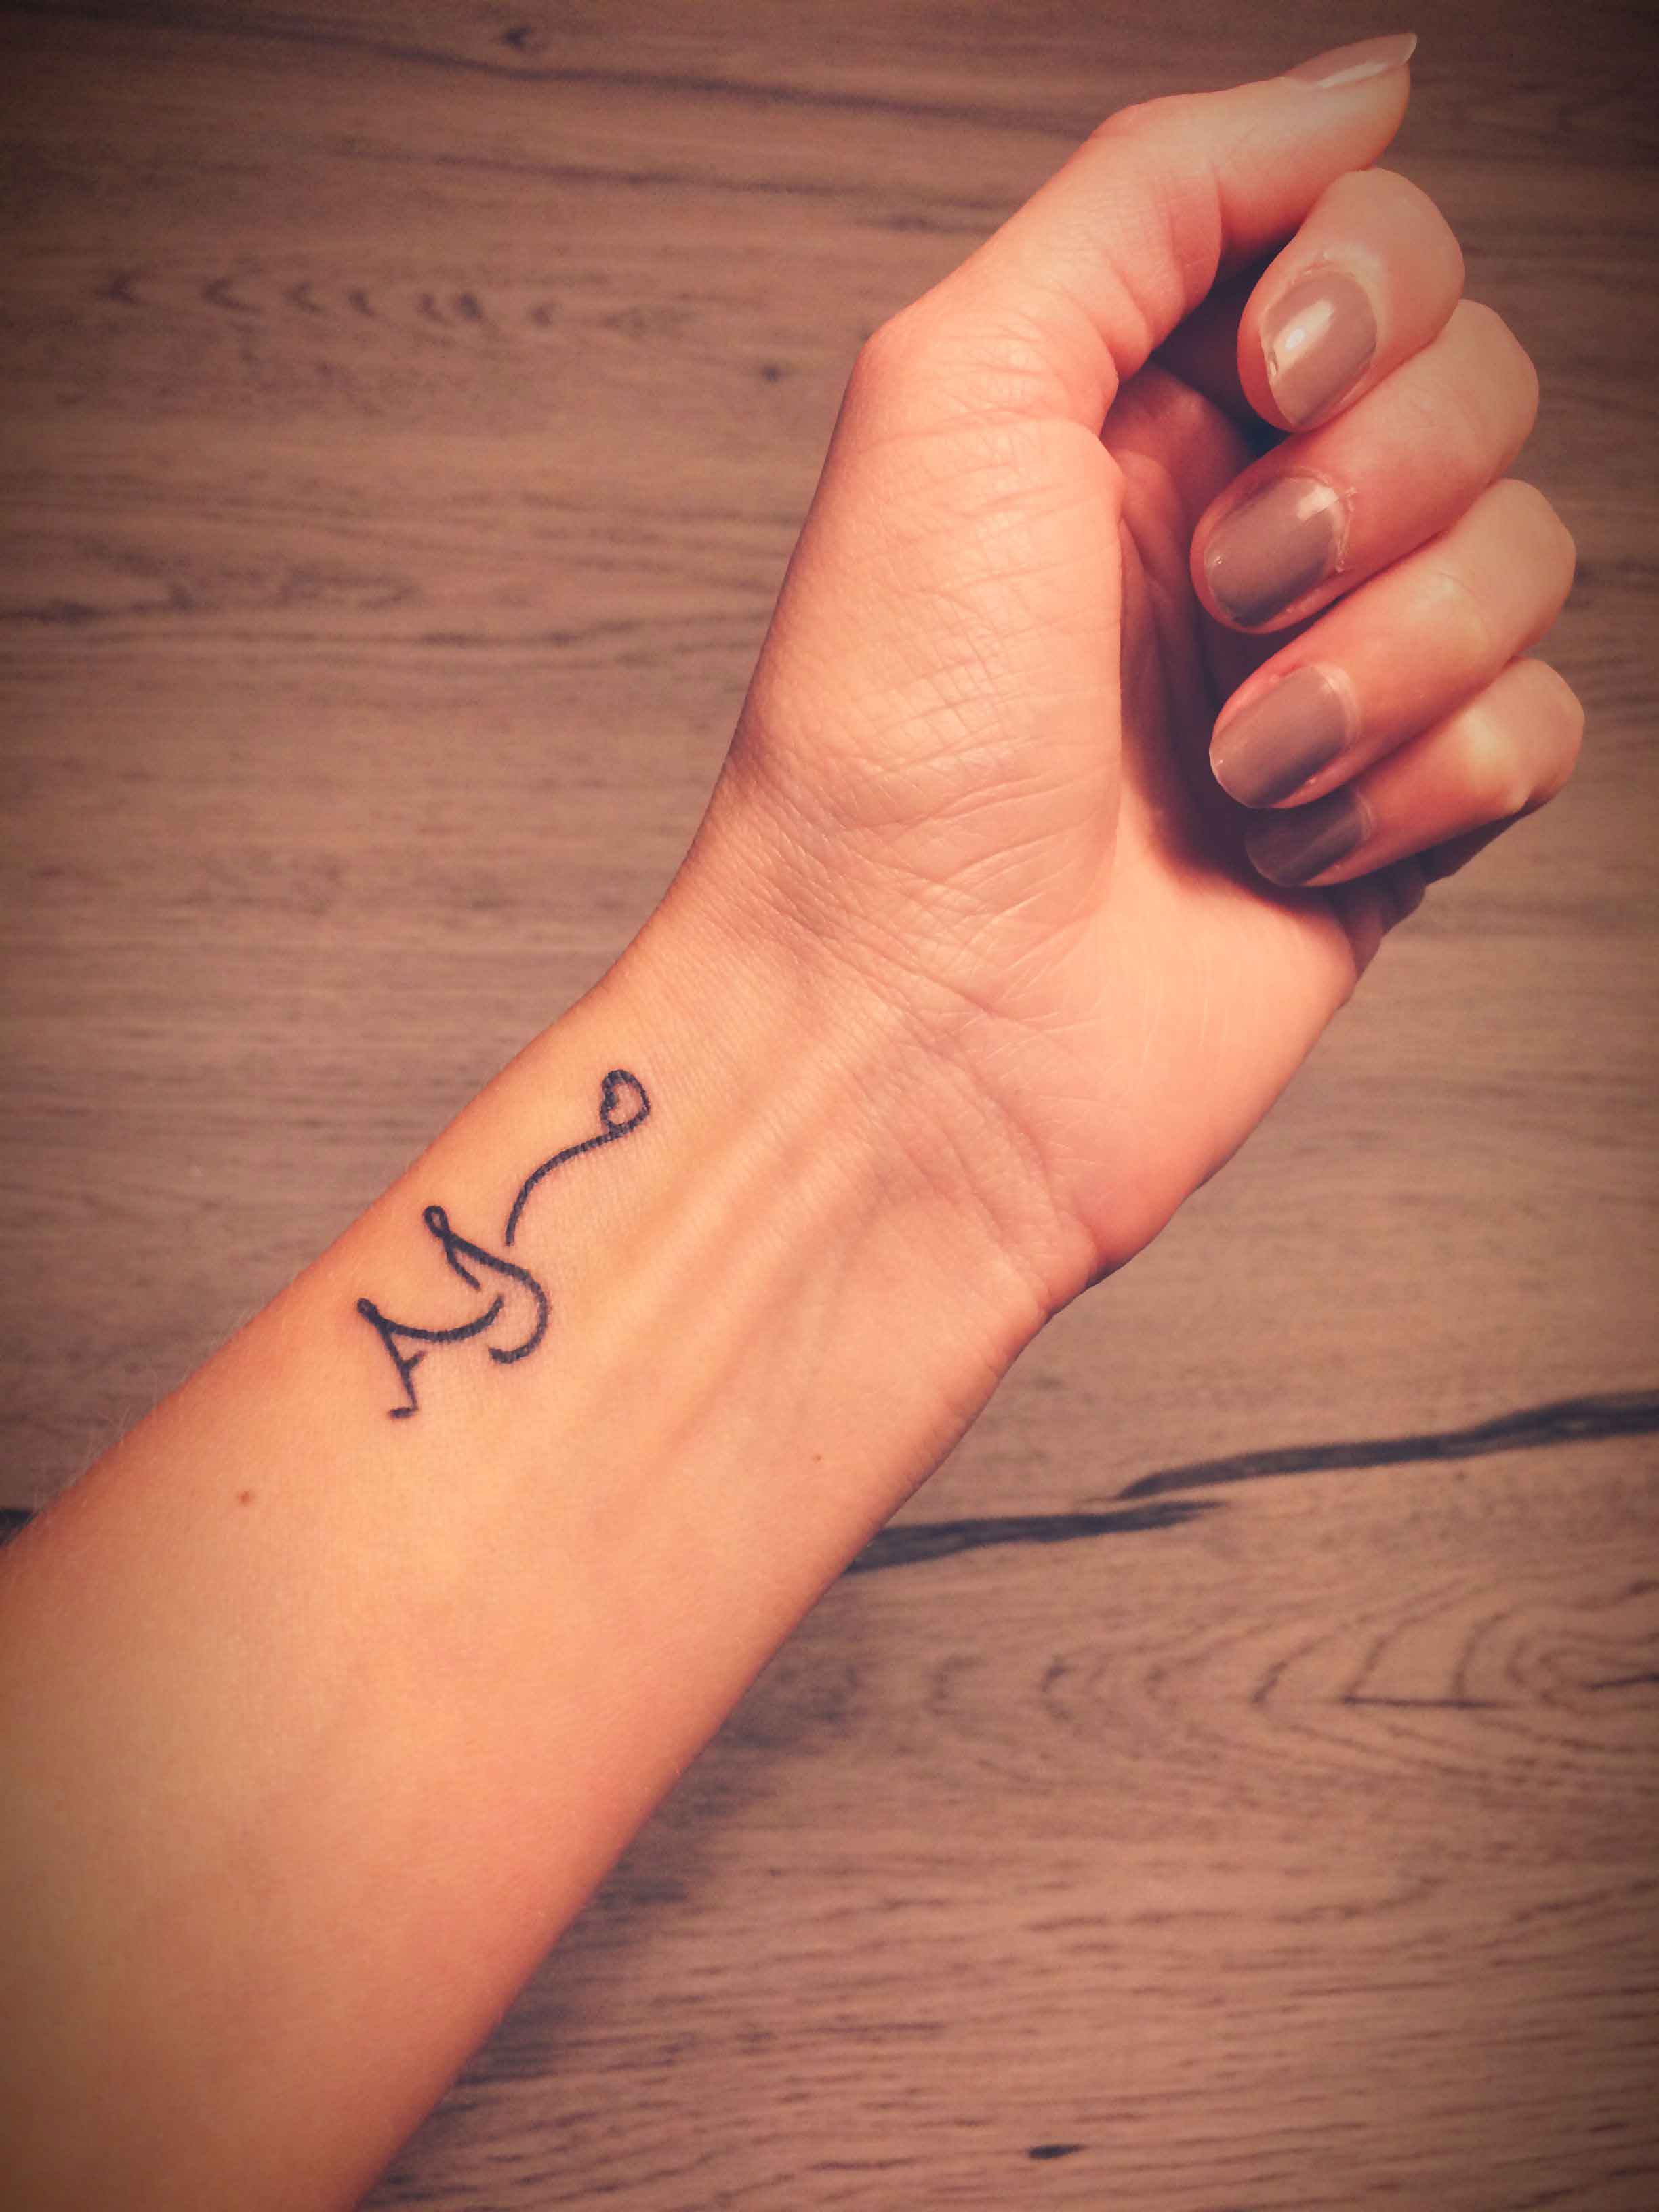 75 Gorgeous Mixed Style Tattoos by Some of the World's Best Artists